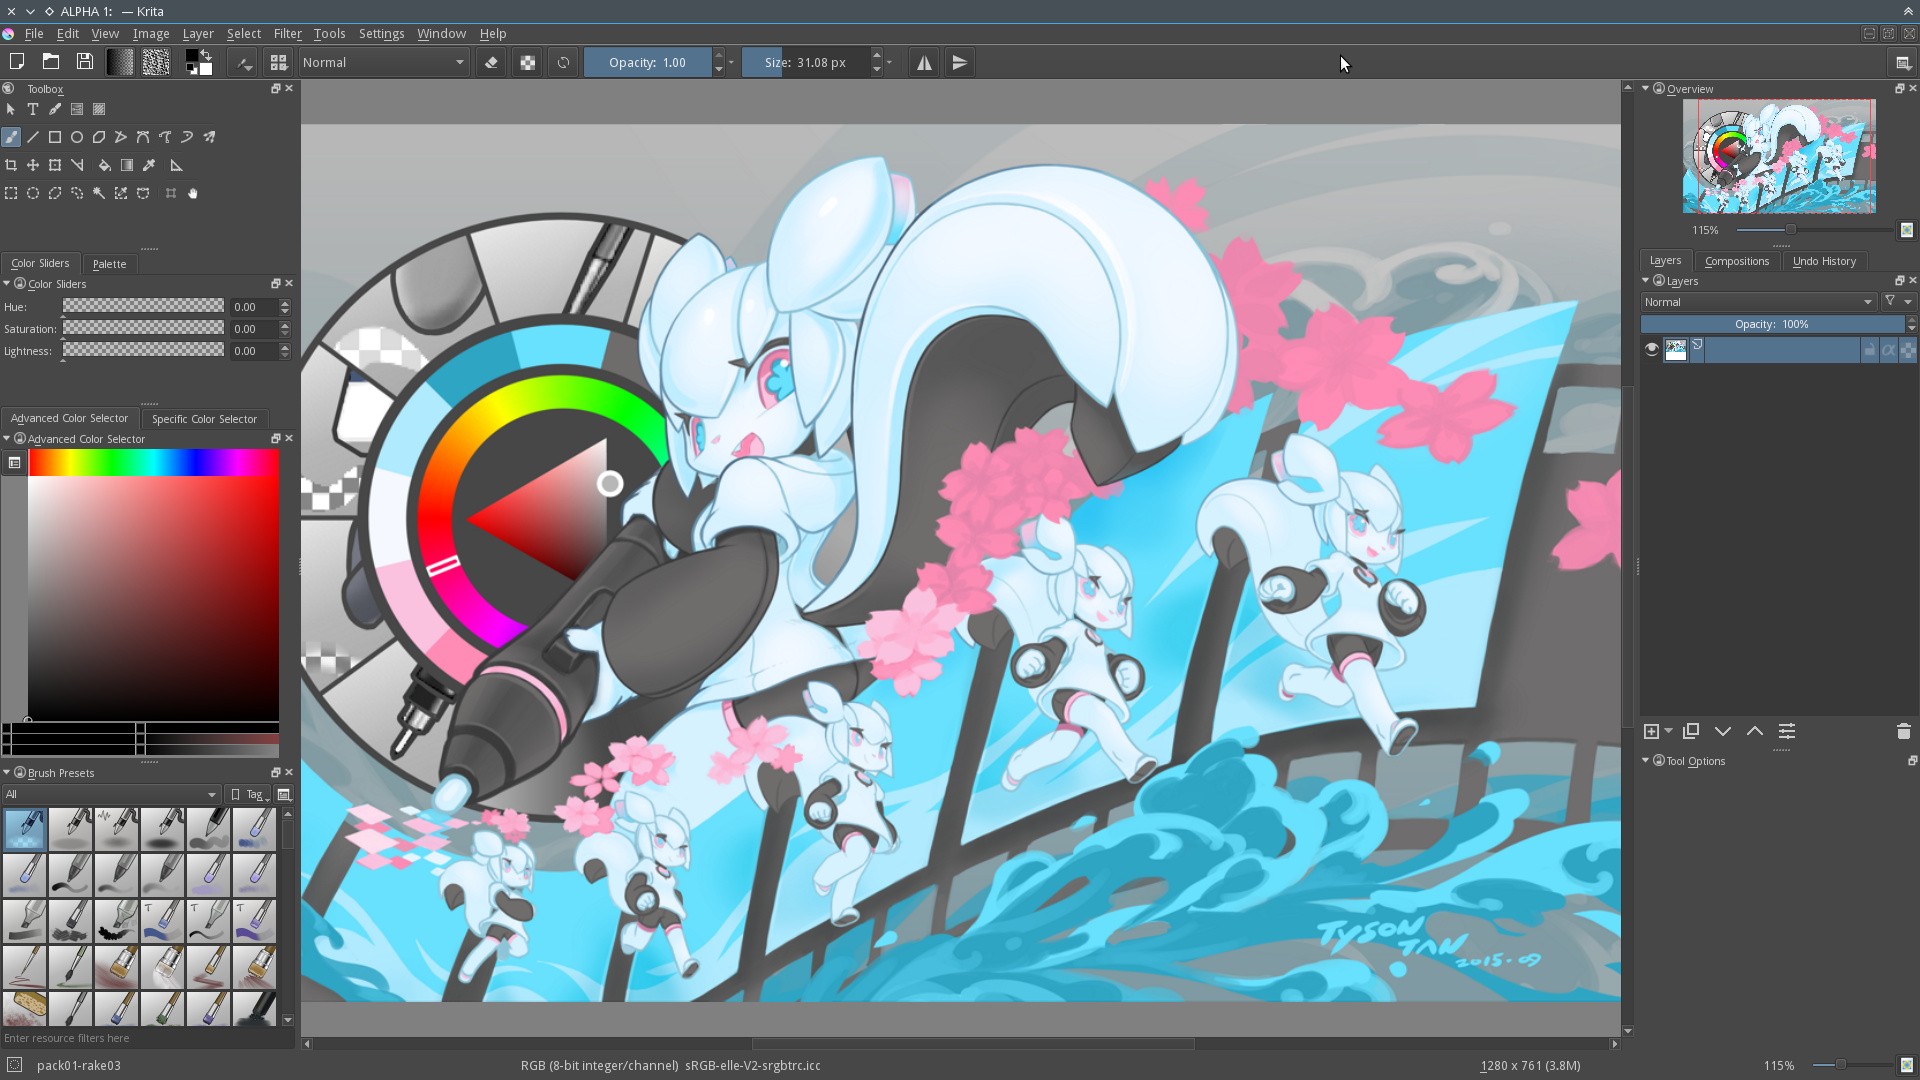 krita-3-0-open-source-digital-painting-tool-lands-may-1-first-alpha-is-out-now-502770-3.jpg